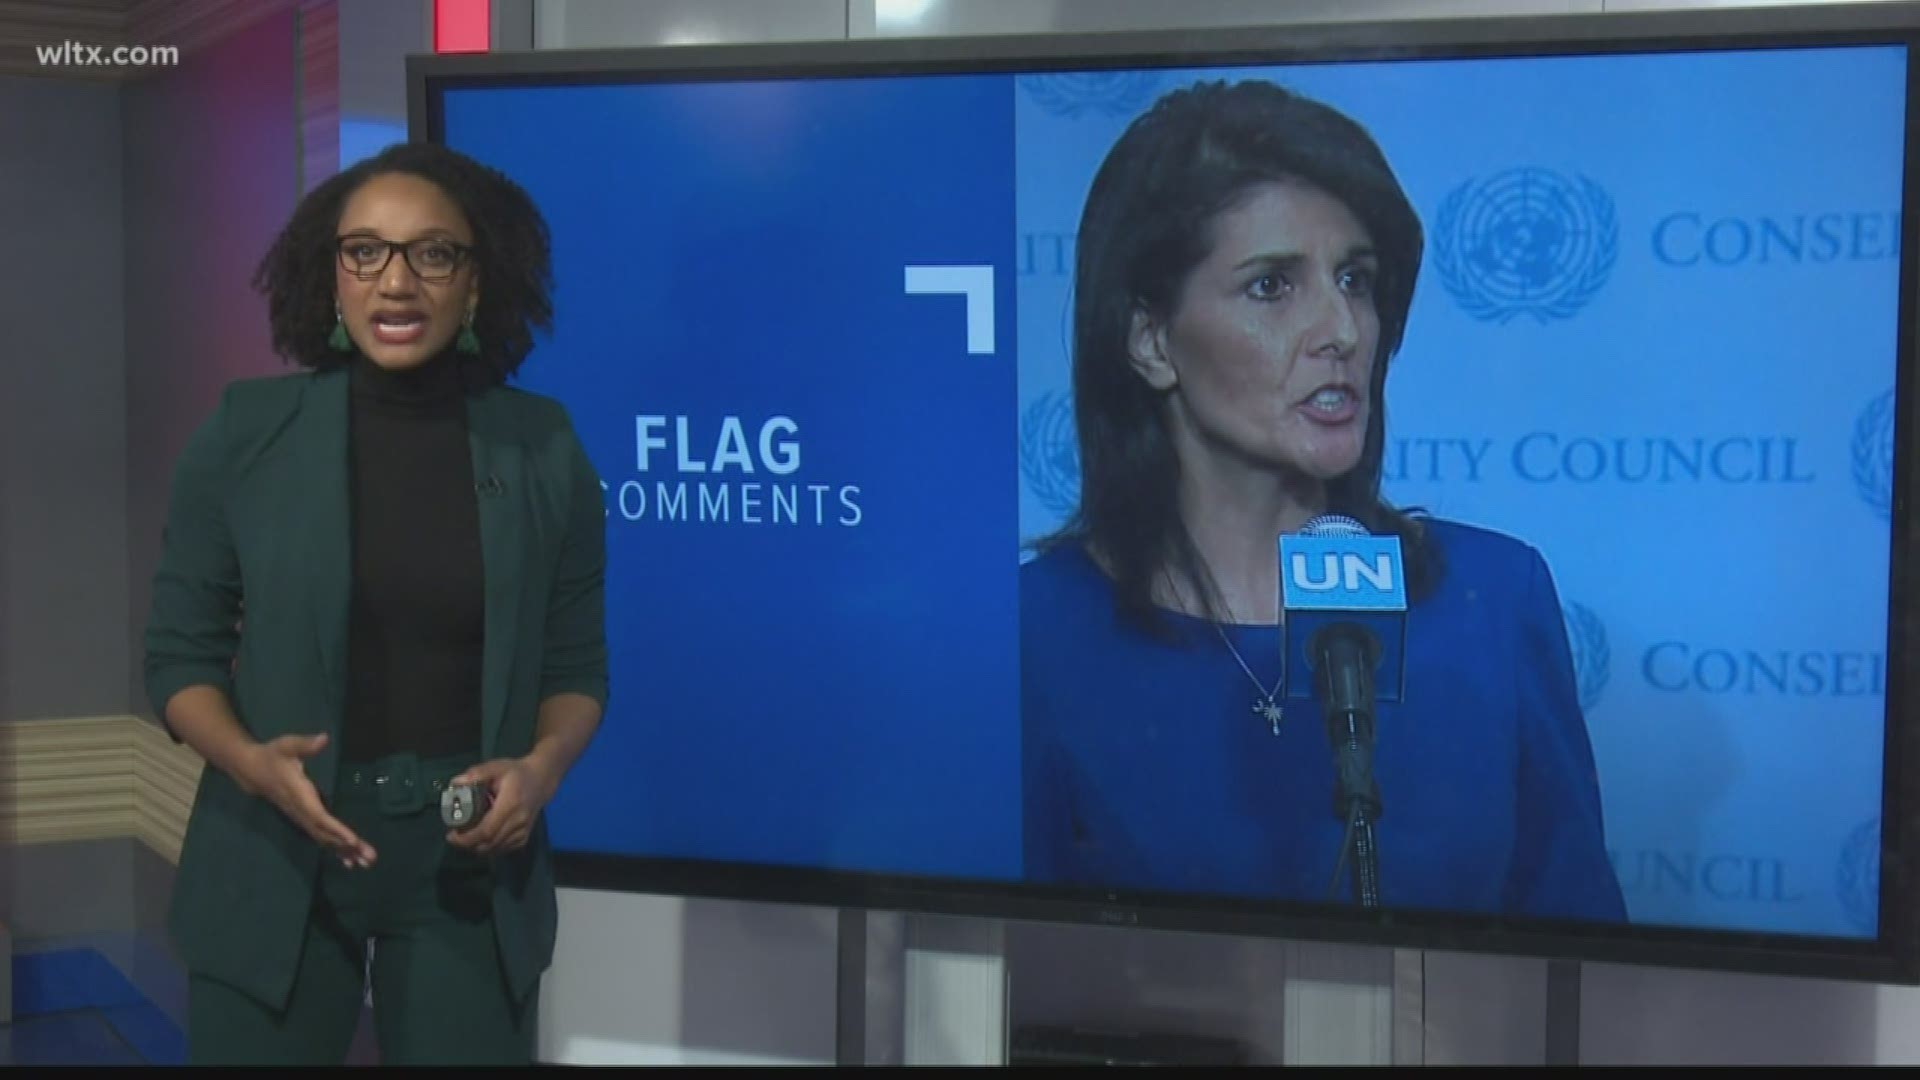 Haley told conservative political commentator and Blaze TV host Glenn Beck that the flag had meant “service, and sacrifice and heritage” to some in South Carolina.